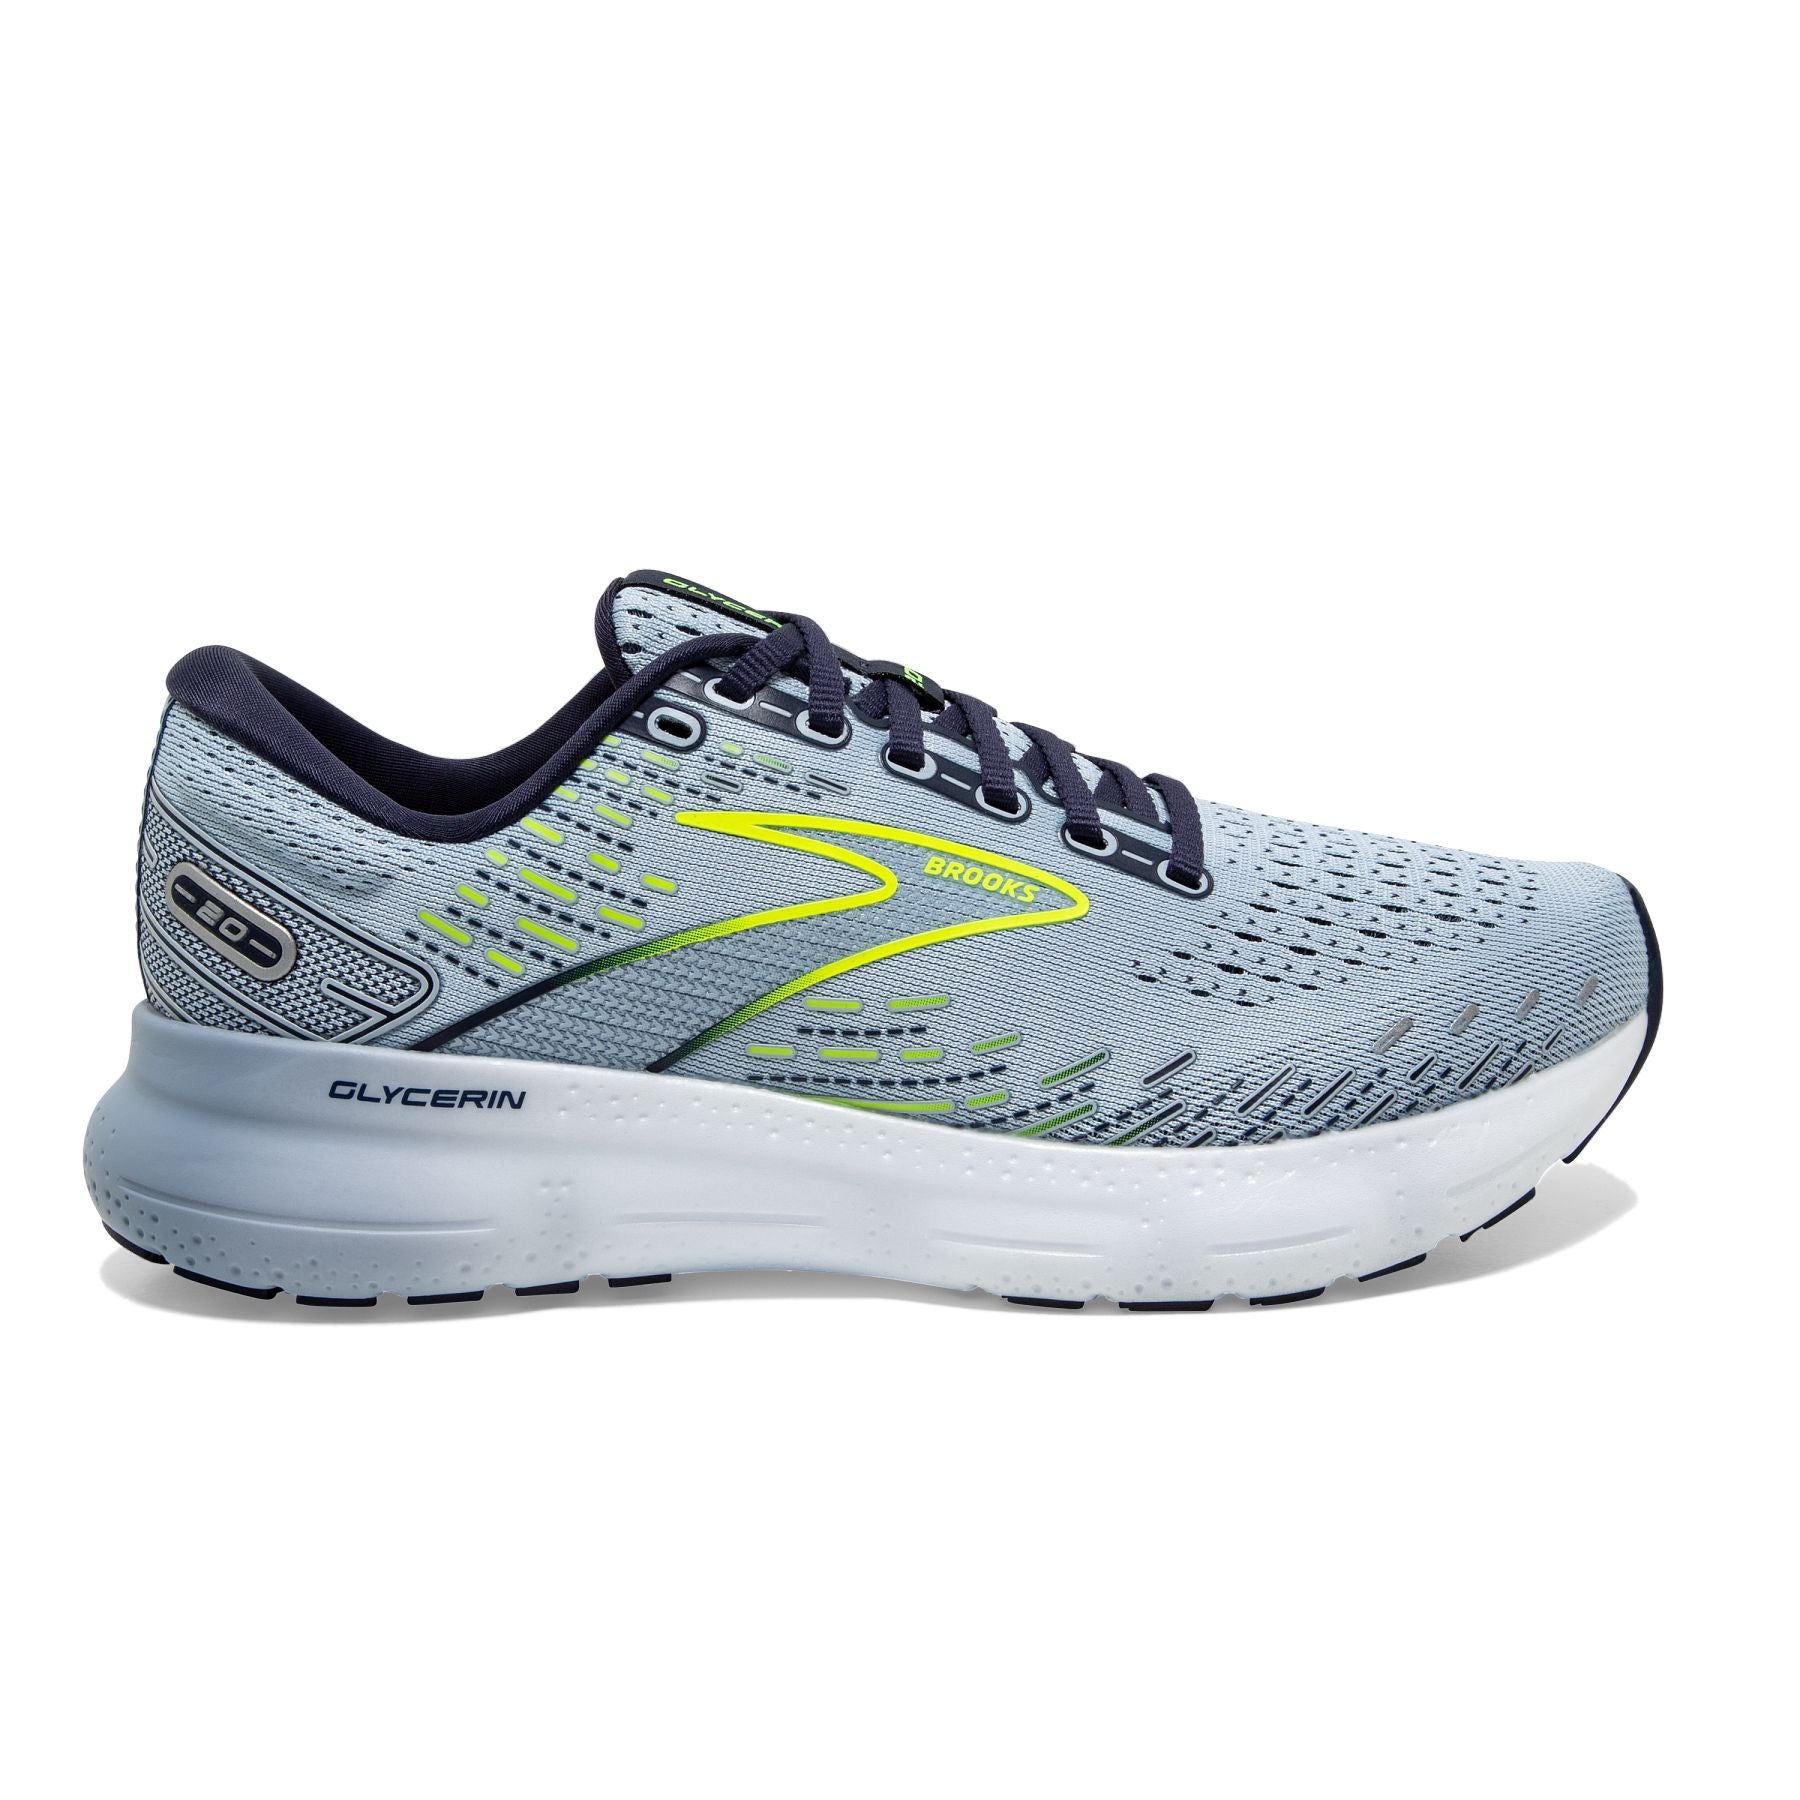 Lateral view of the Women's Glycerin 20 by BROOKS in the color Light Blue/Peacoat/Nightlife